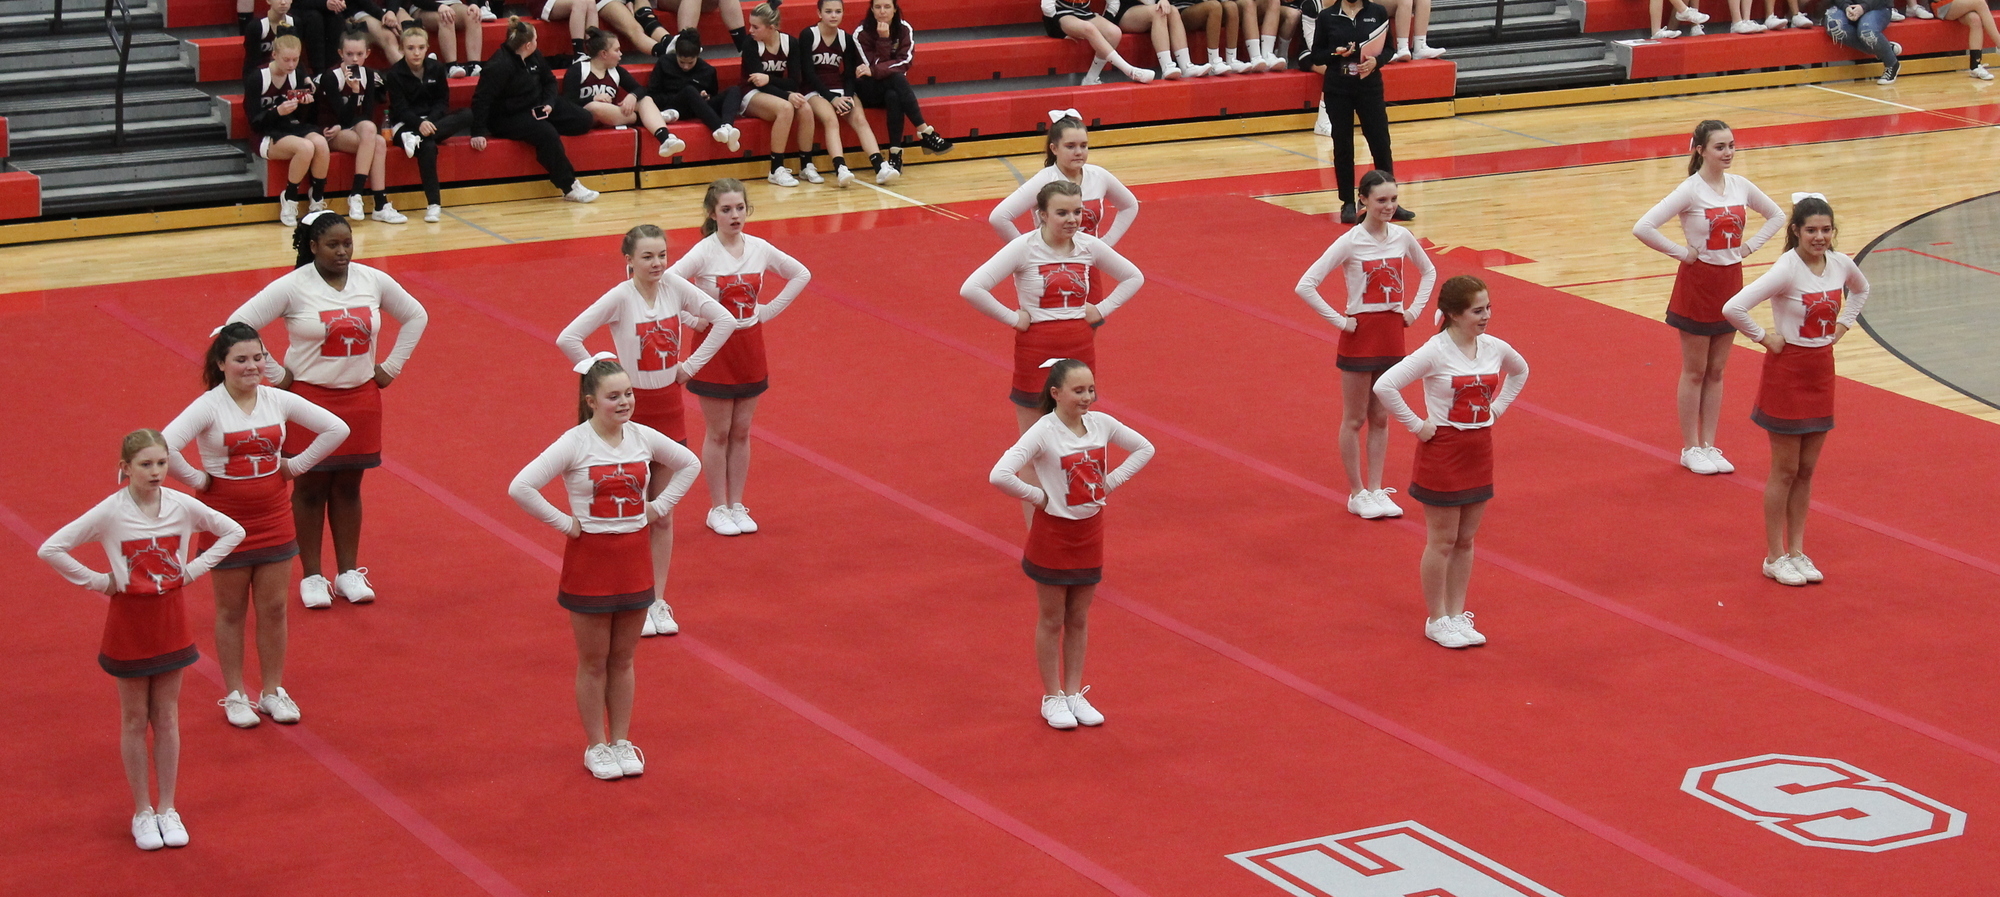 Cheerleaders at a competition